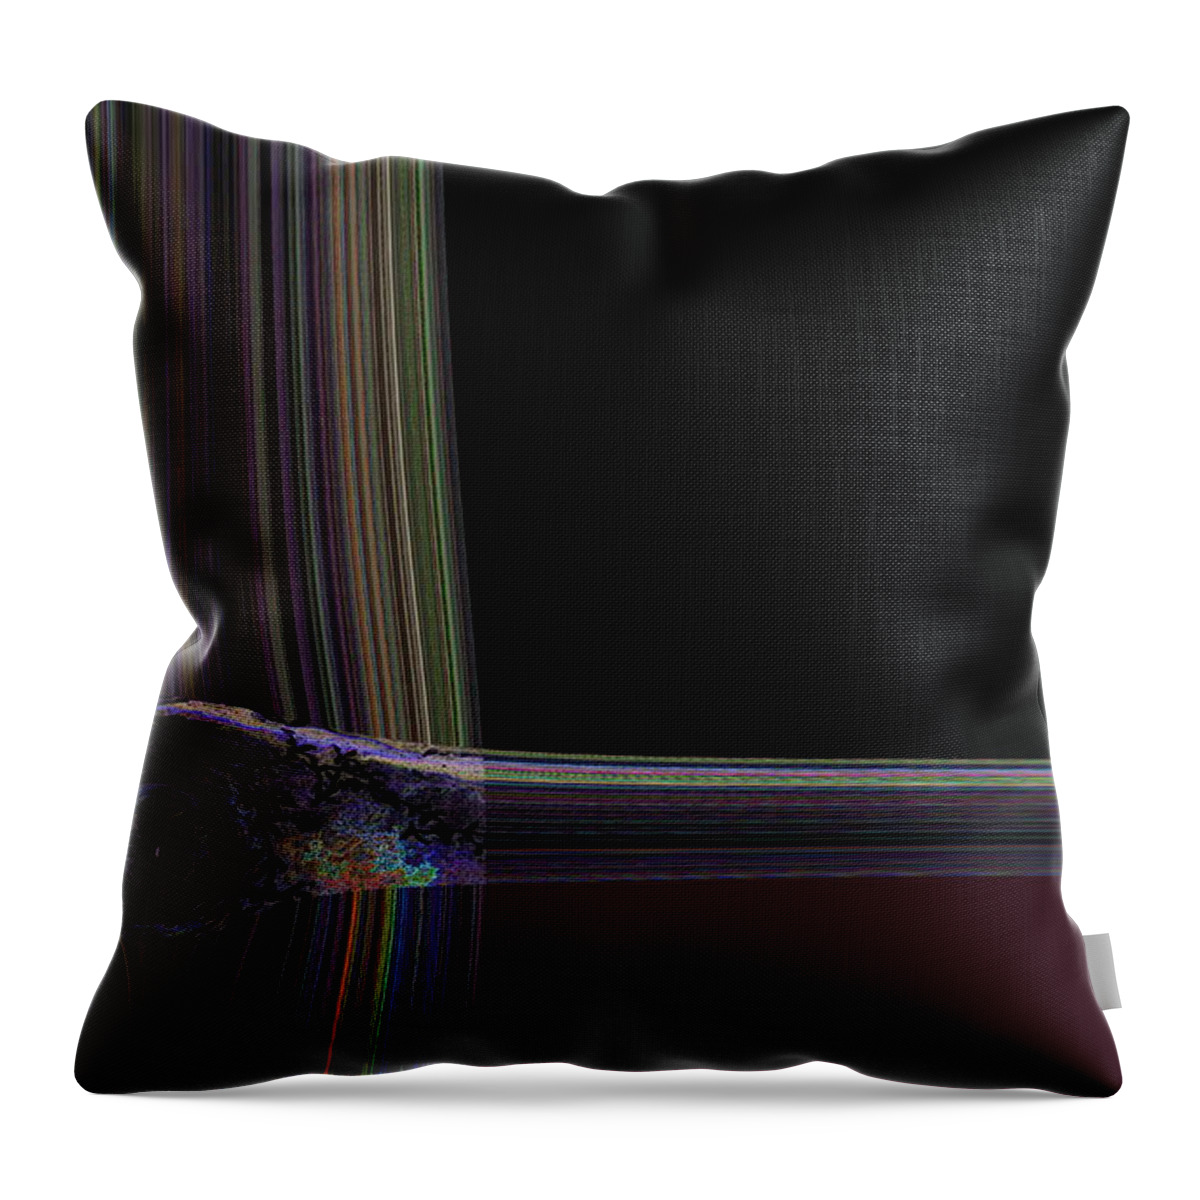 Blue Throw Pillow featuring the photograph Loci by Cheryl Charette